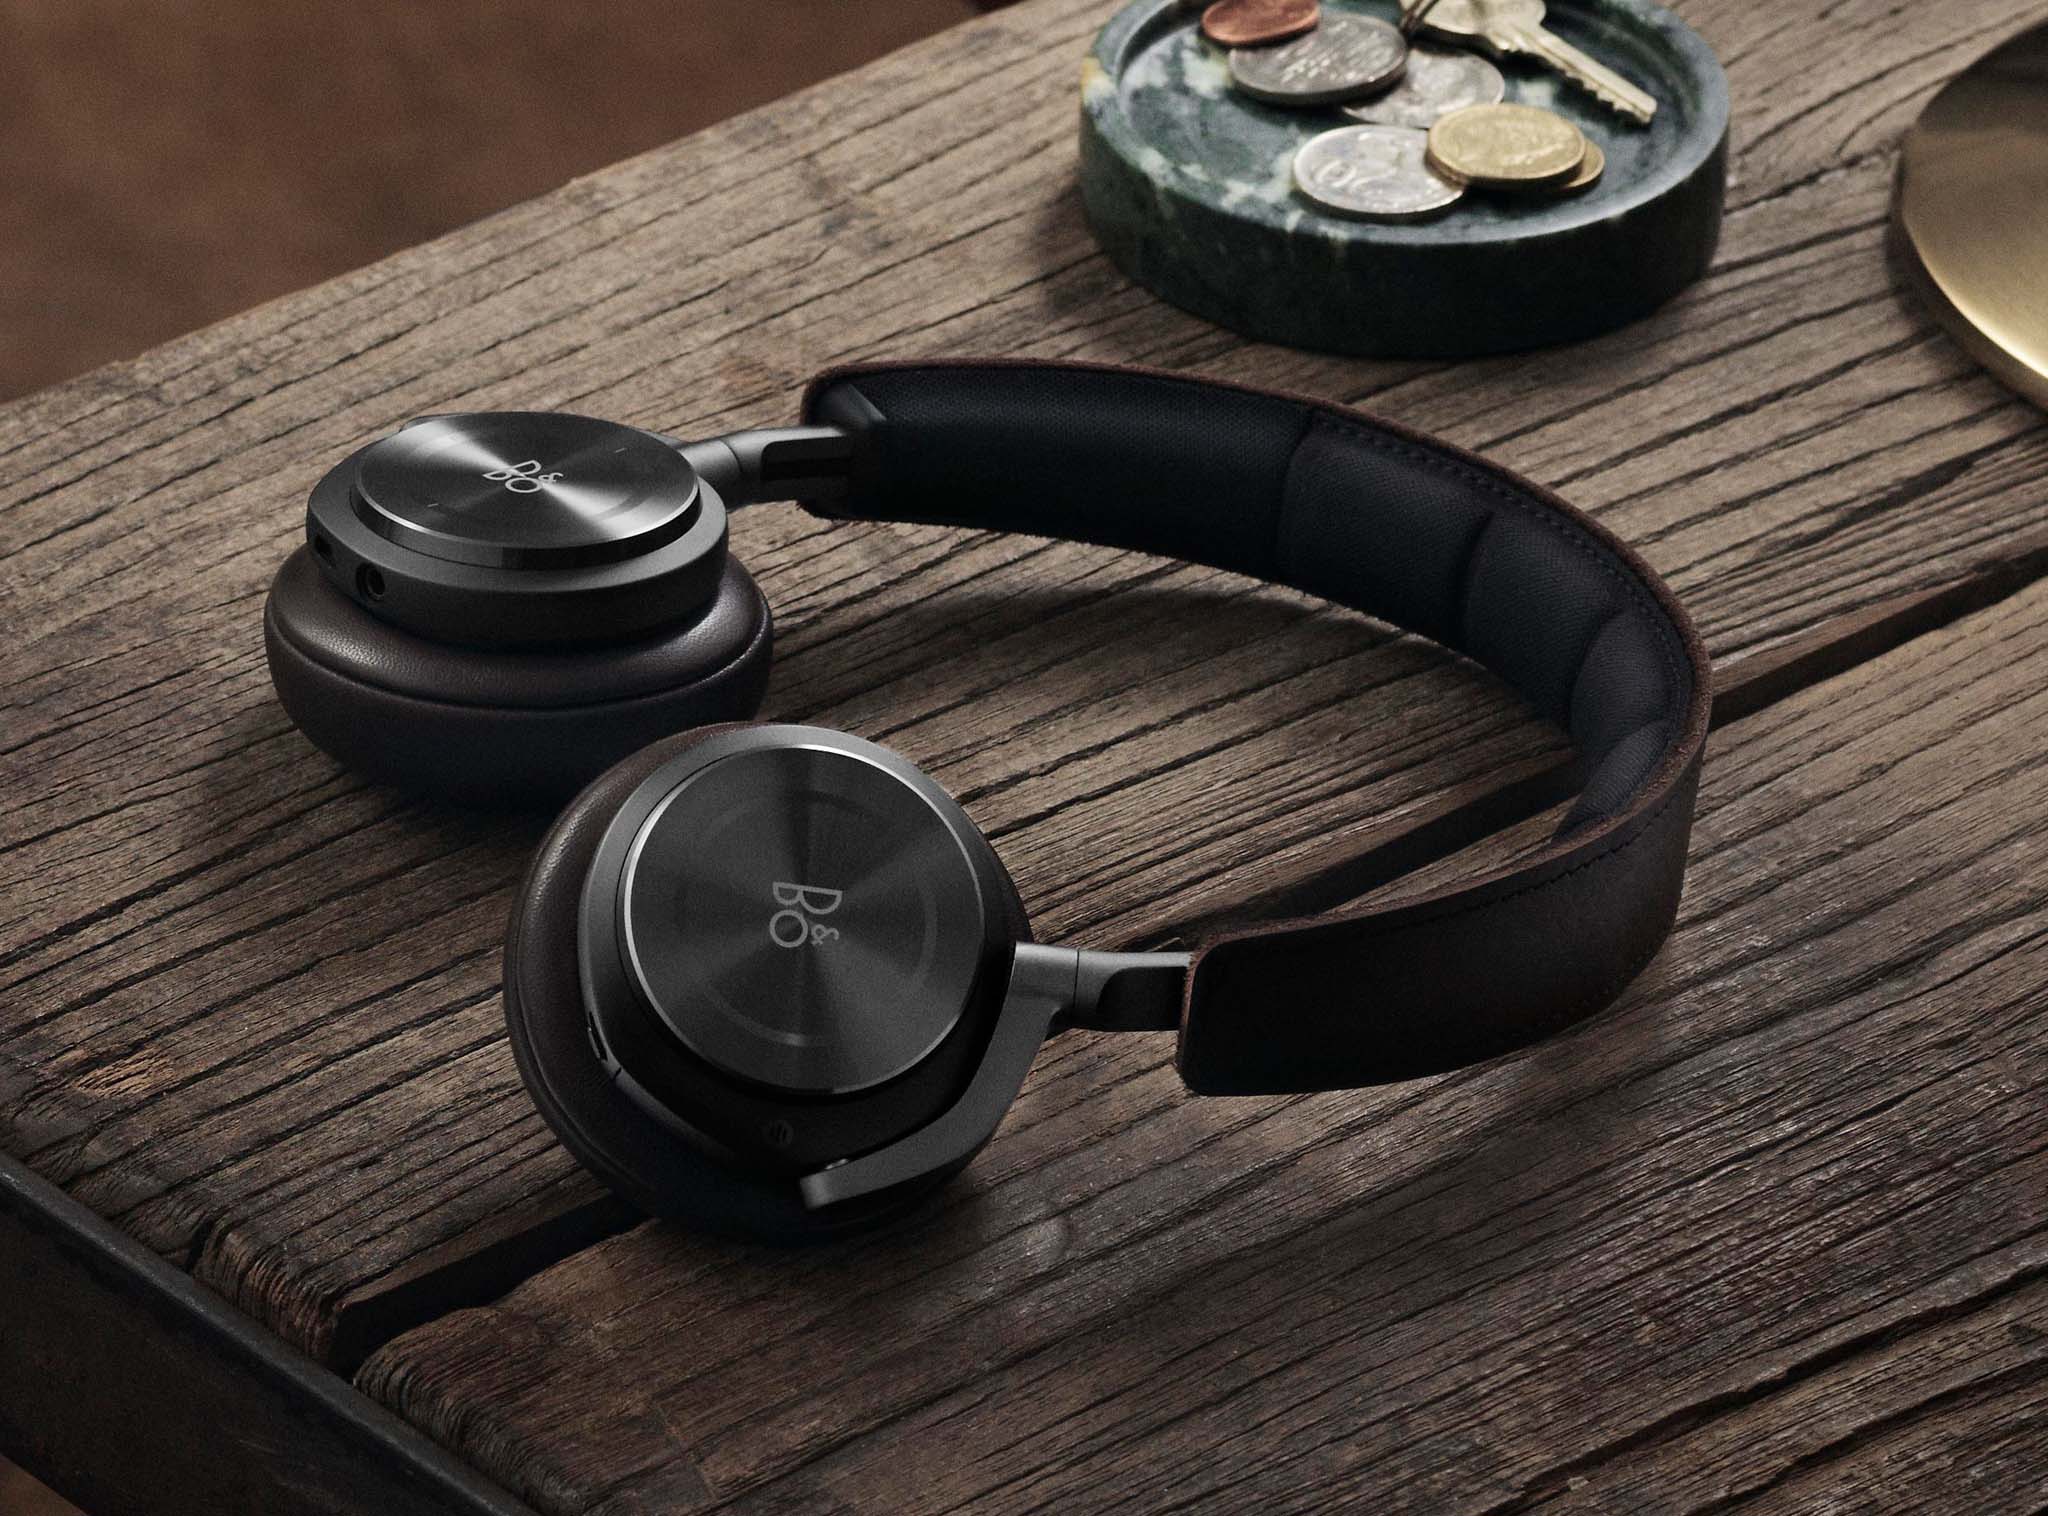 Beoplay H8i – Bang & Olufsen Support